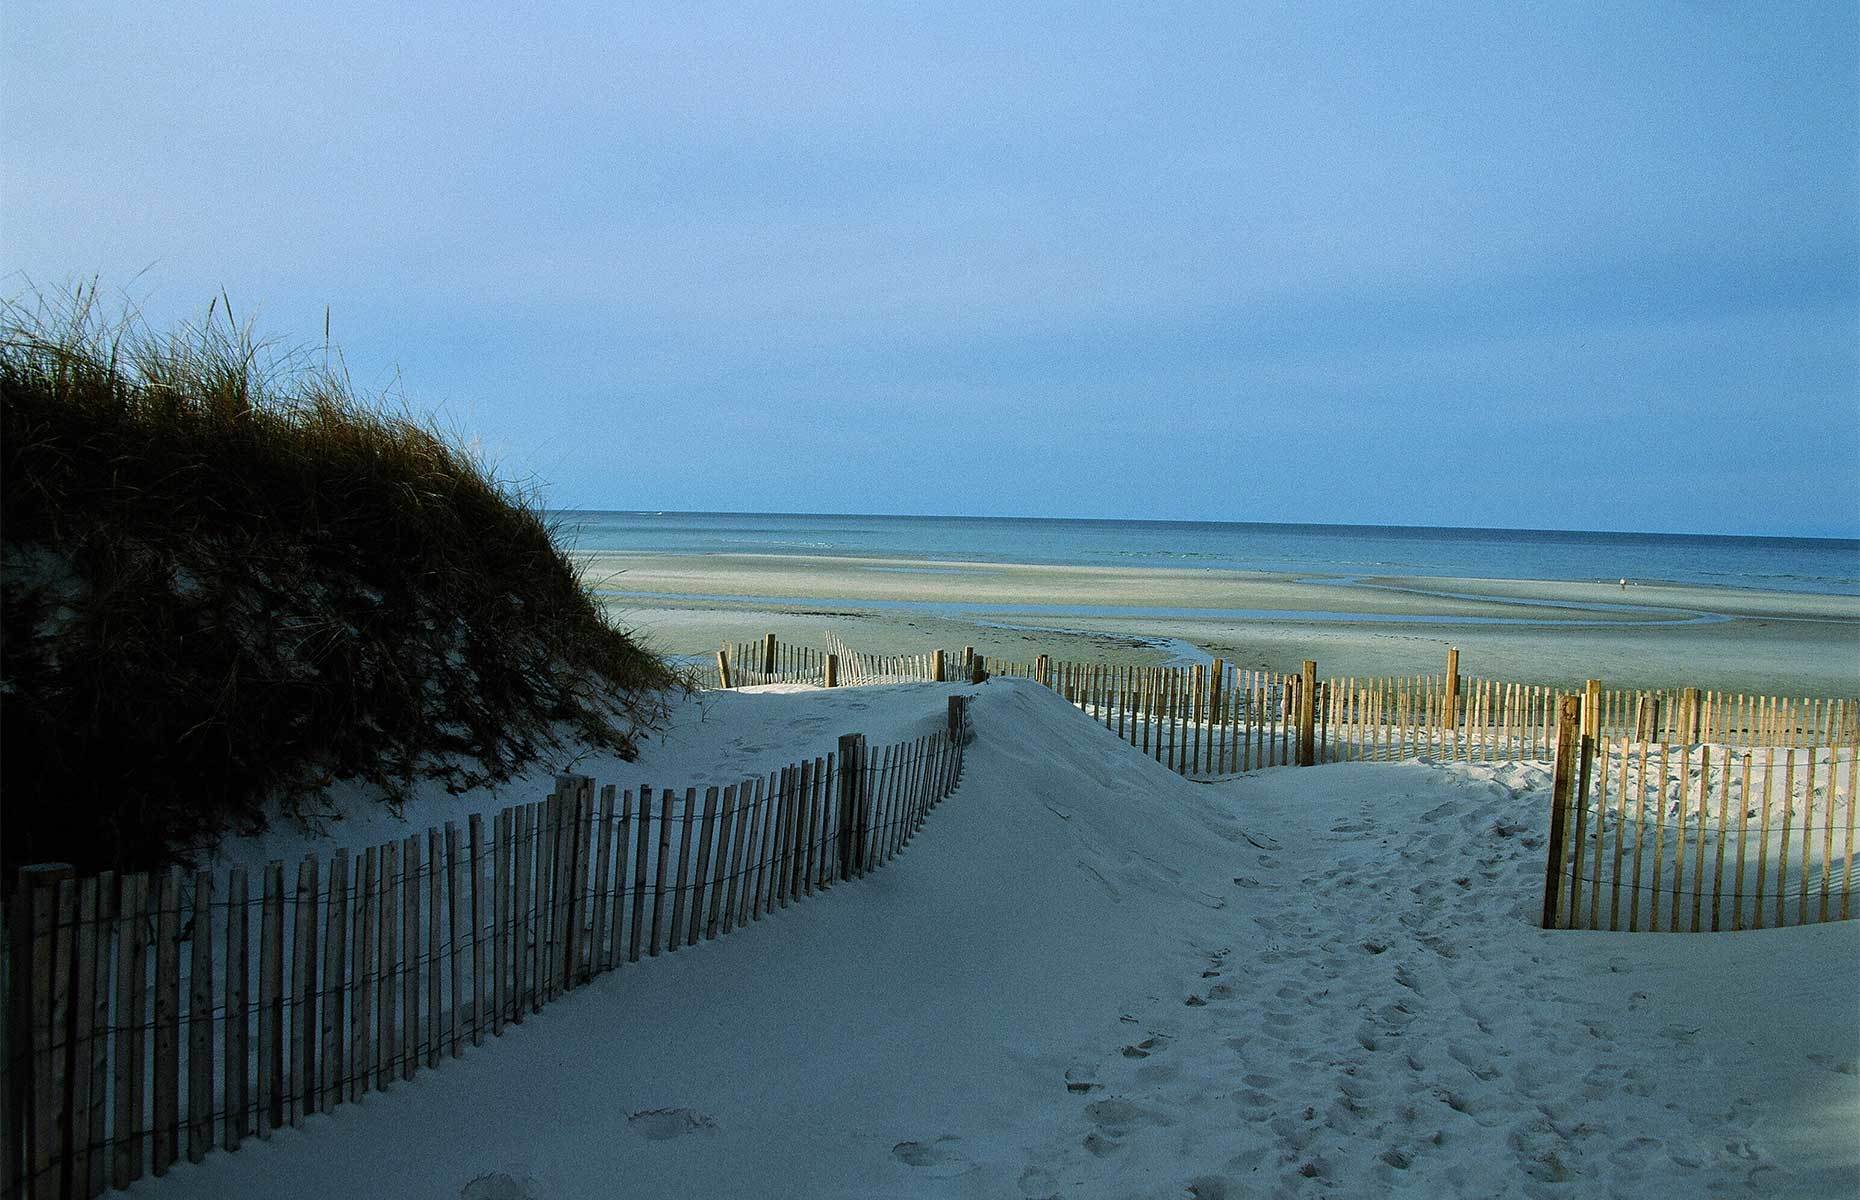 <p class="p1"><span>If you’re walking around Cape Cod, make your way to Mayflower Beach to see a breathtaking sunset over the ocean. Enjoy this beach’s <a href="https://www.capecod.com/mayflower-beach/" rel="noreferrer noopener"><span>silky sands</span></a> during extended, daytime rambles.</span></p>